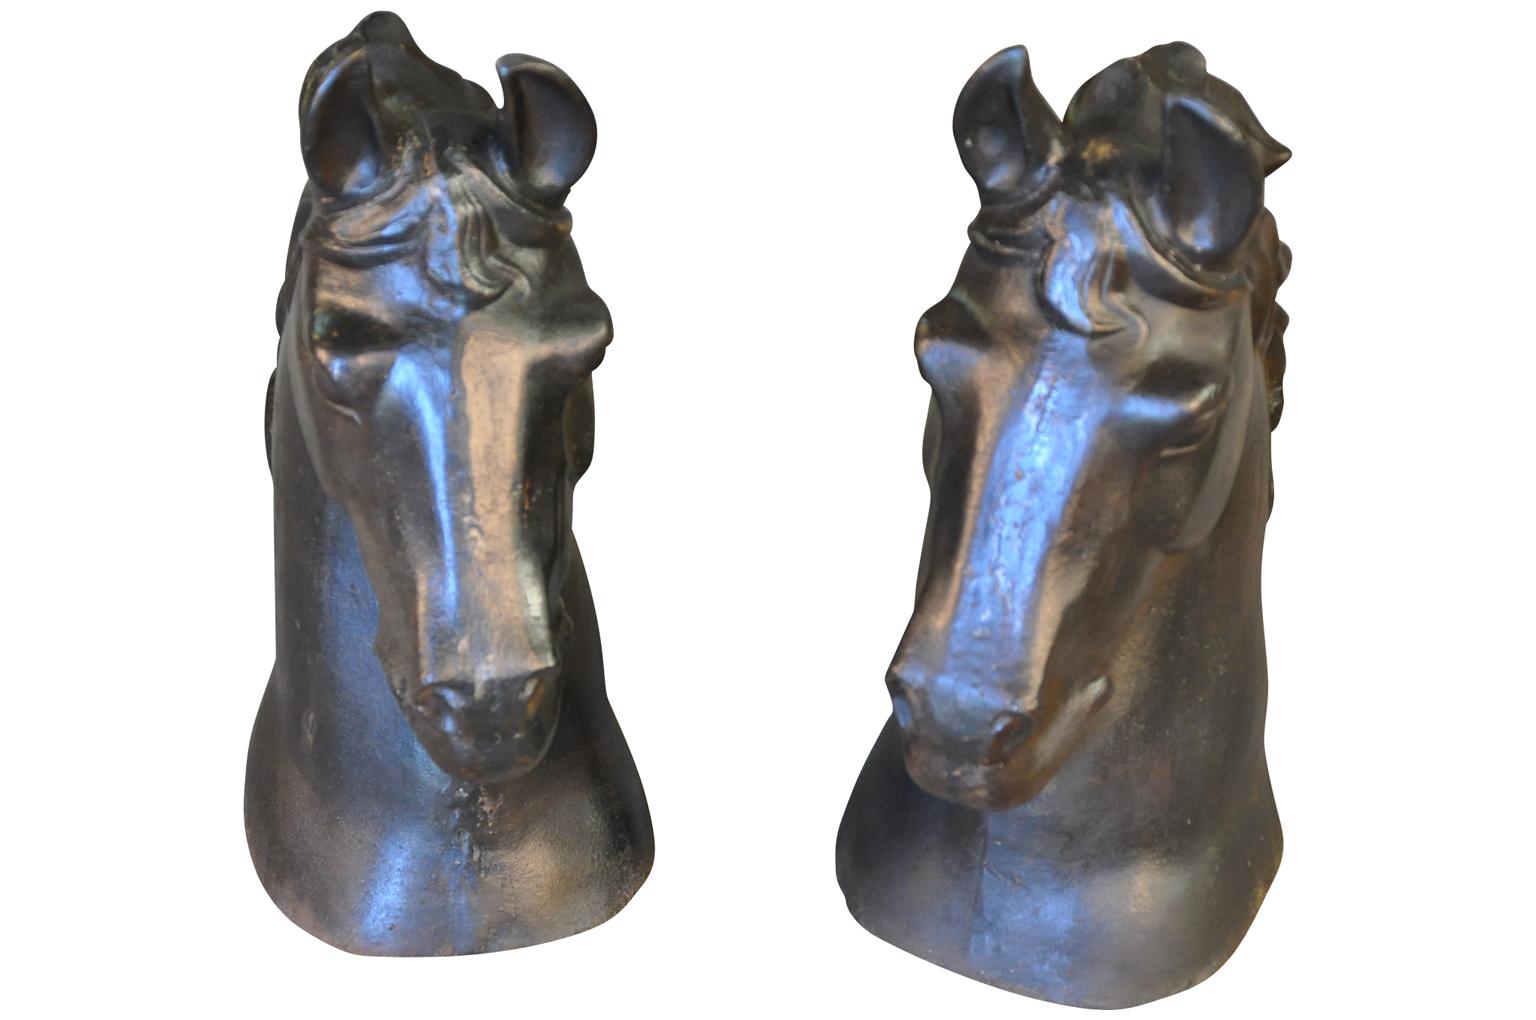 A very impressive pair of French mid-20th century horseheads beautifully cast in patinated iron. Terrific accent pieces for any bookcase, mantel, tabletop or garden accent.